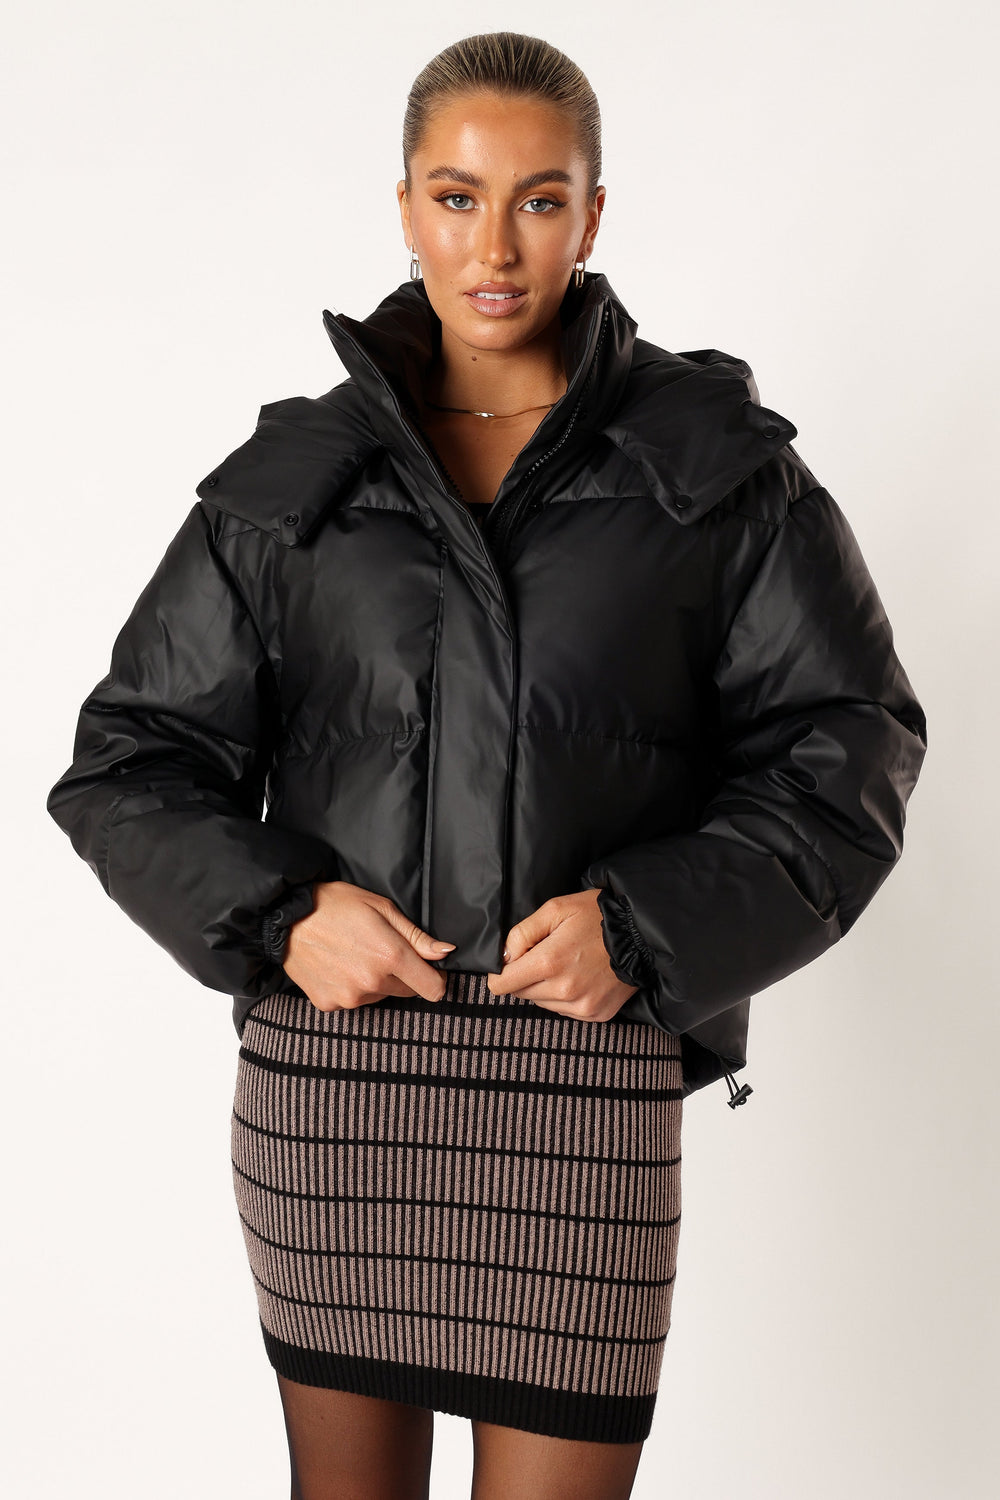 Petal and Pup USA OUTERWEAR Tania Puffer Jacket - Black